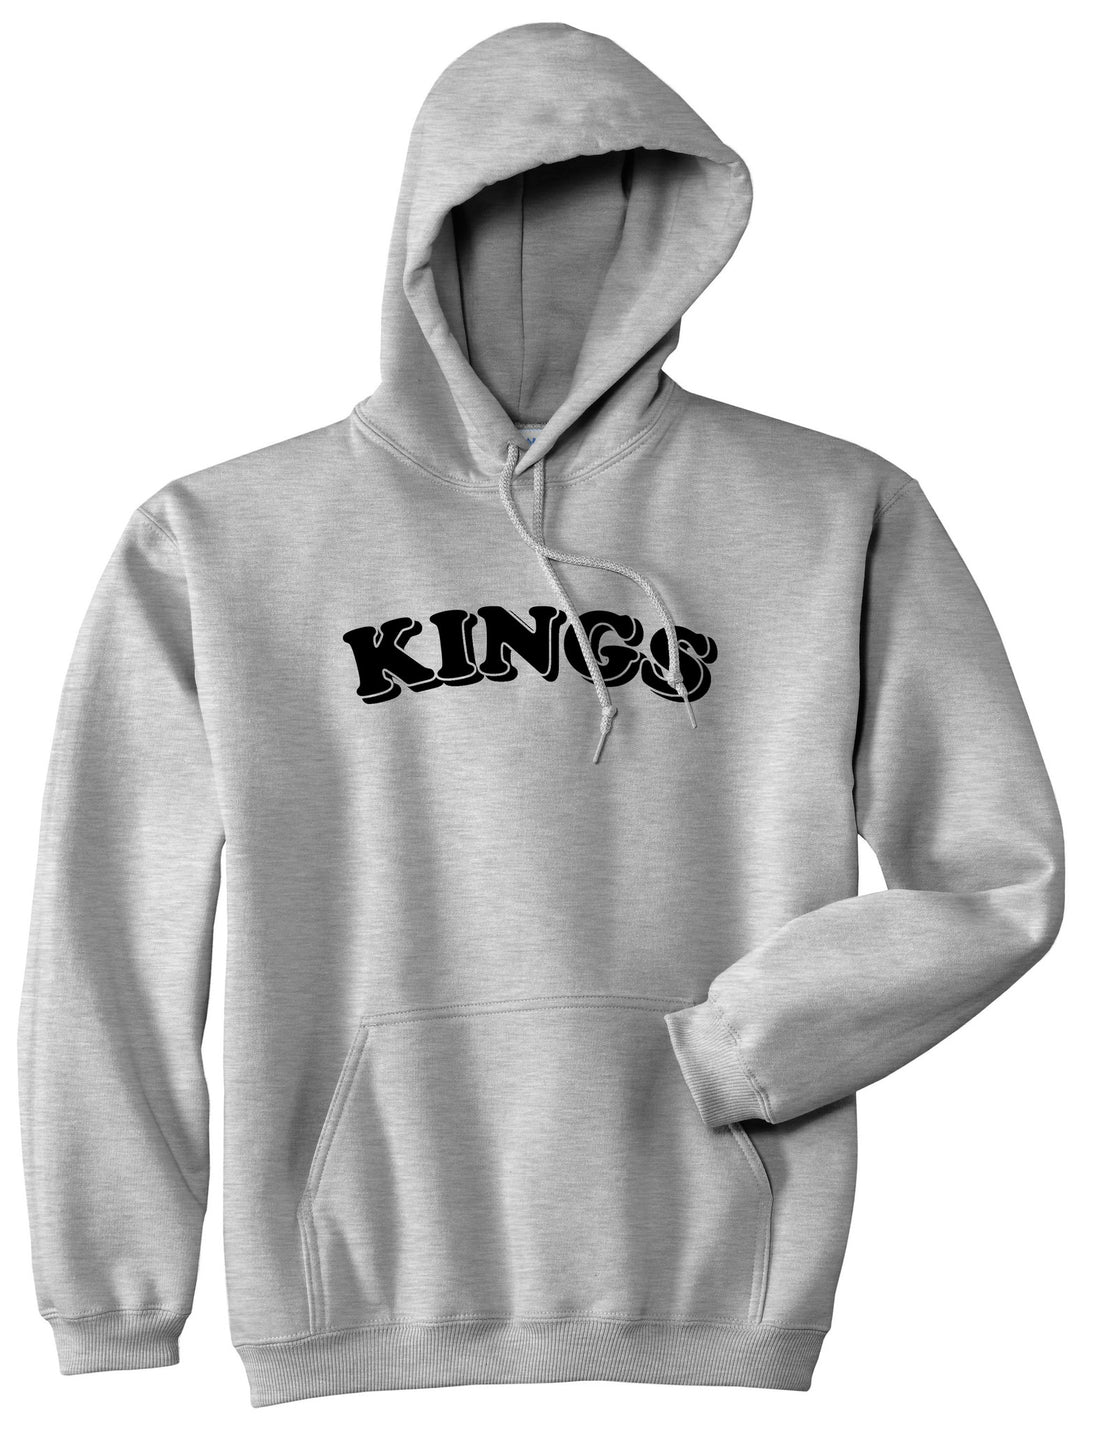 KINGS Bubble Letters Pullover Hoodie in Grey